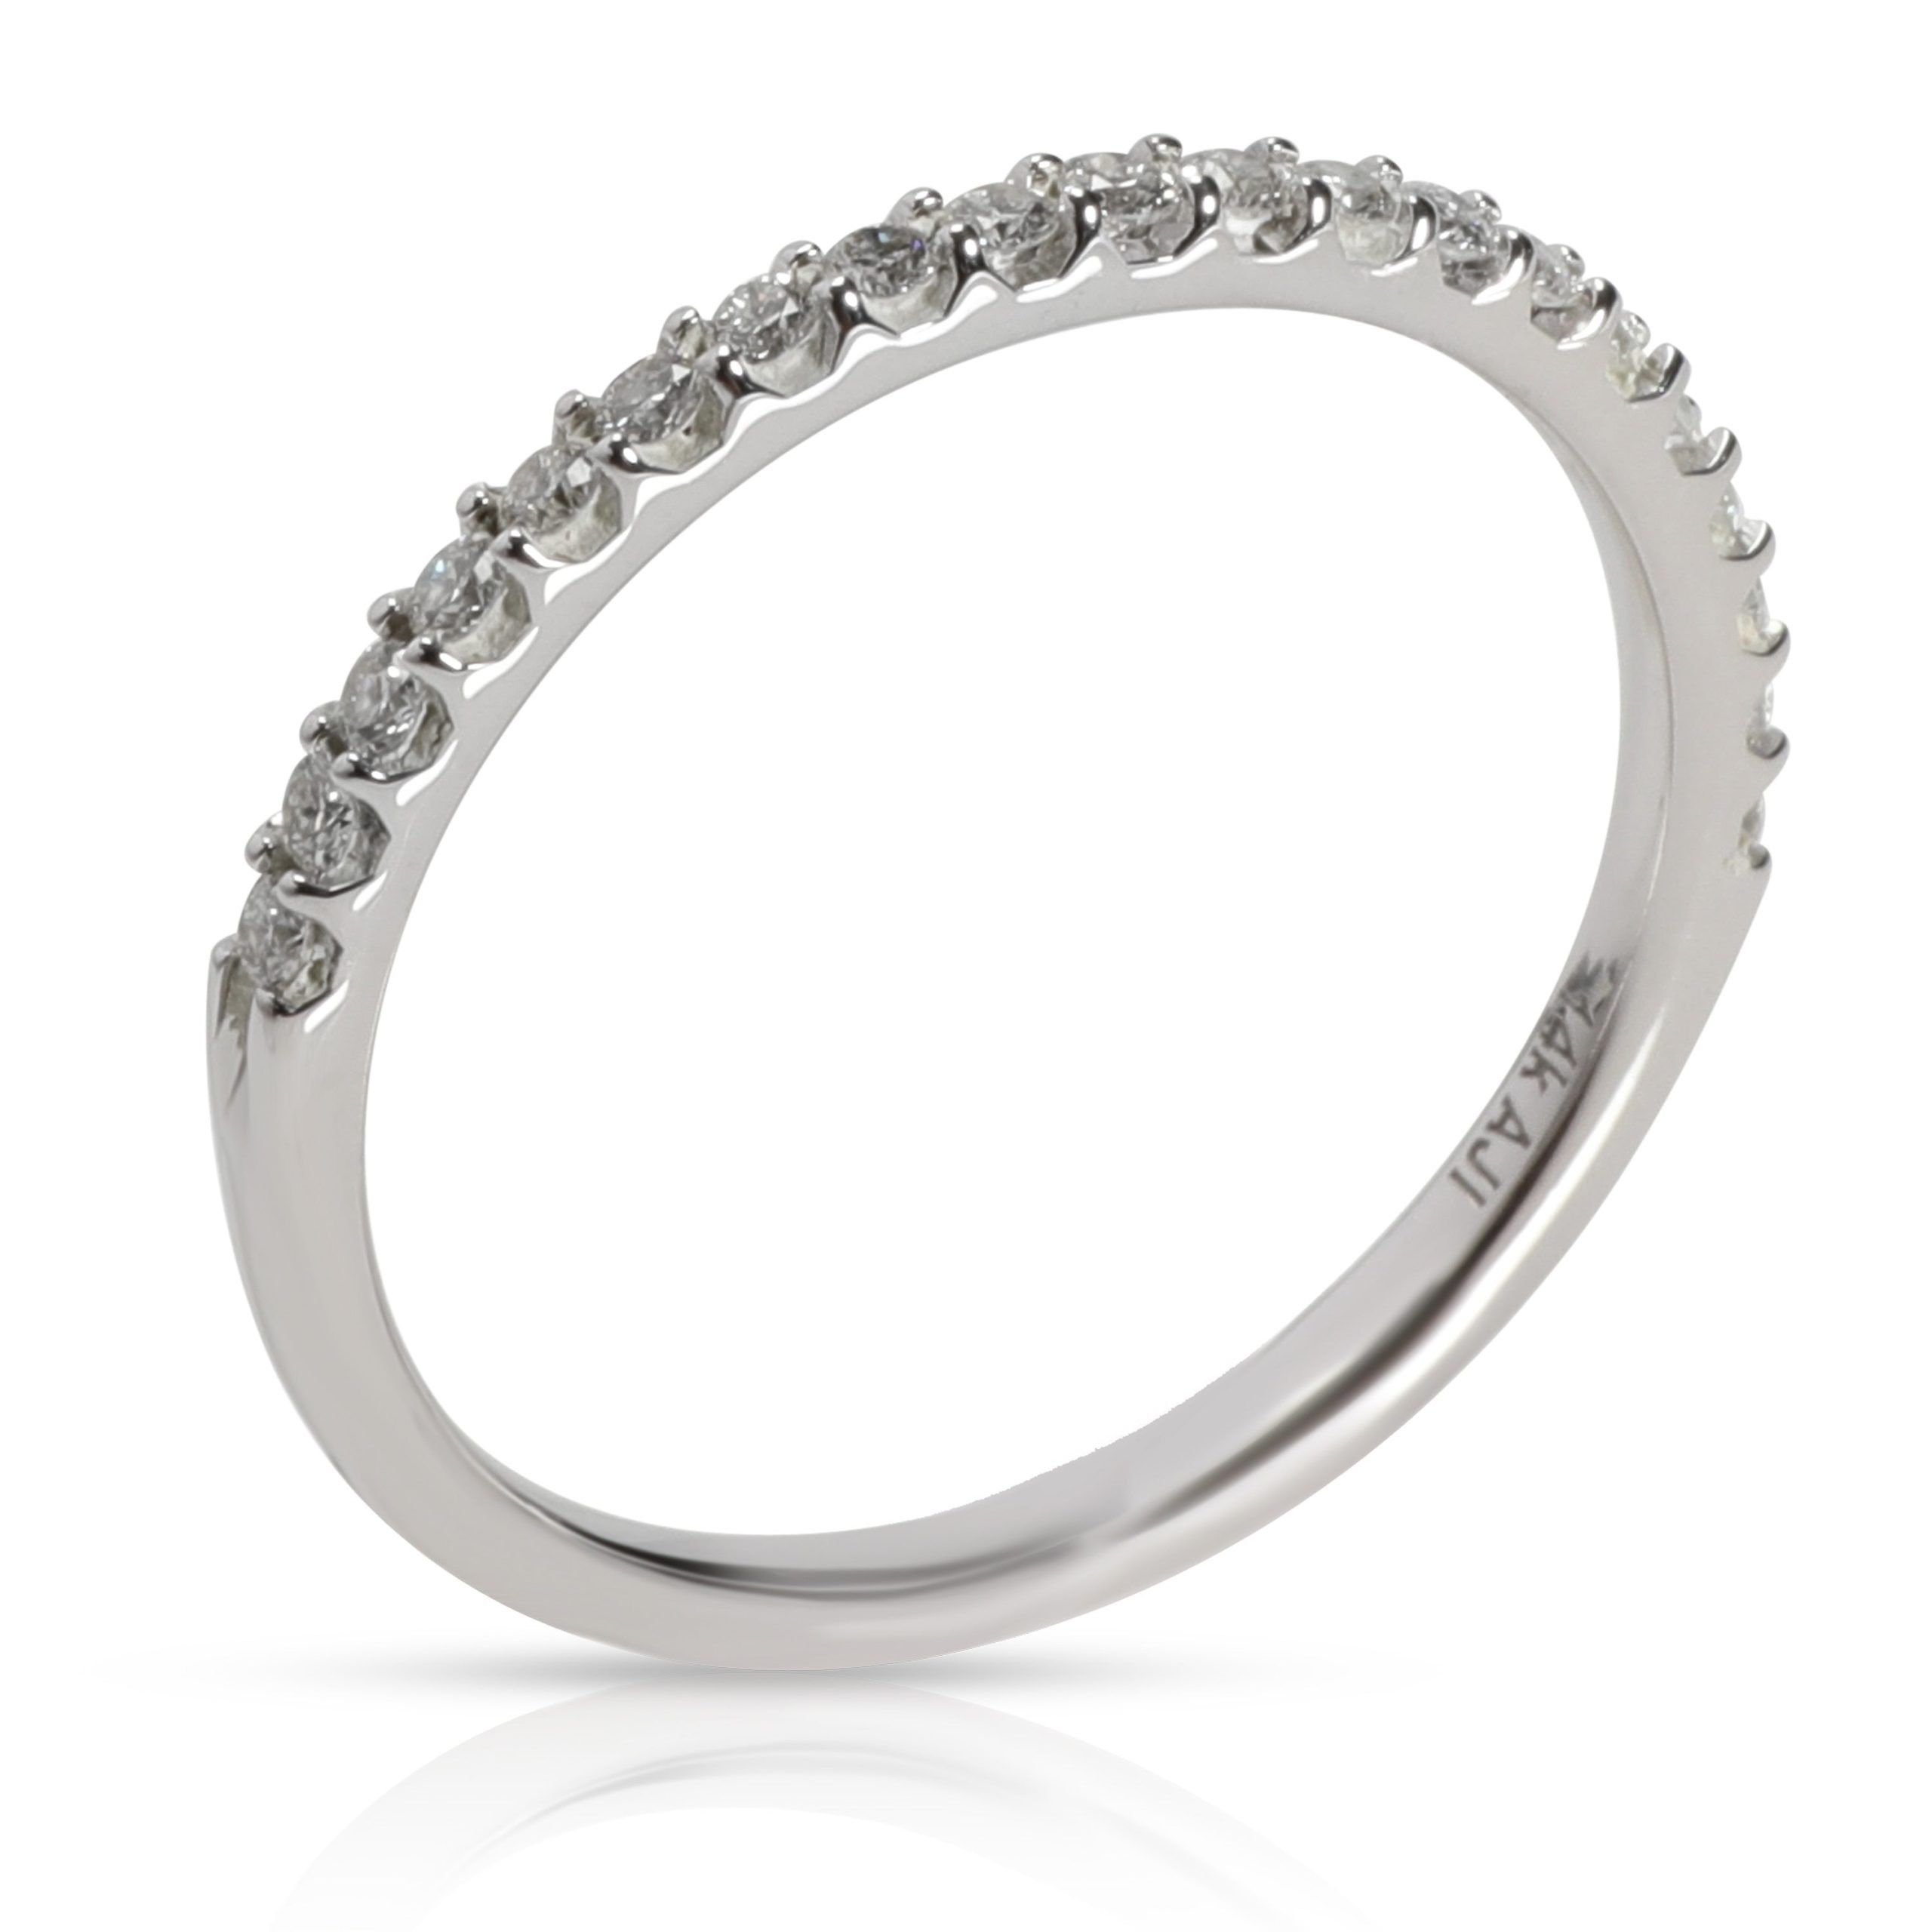 Tiffany & Co. Micro Pave Diamond Wedding Band in 14K White Gold 0.20 ...